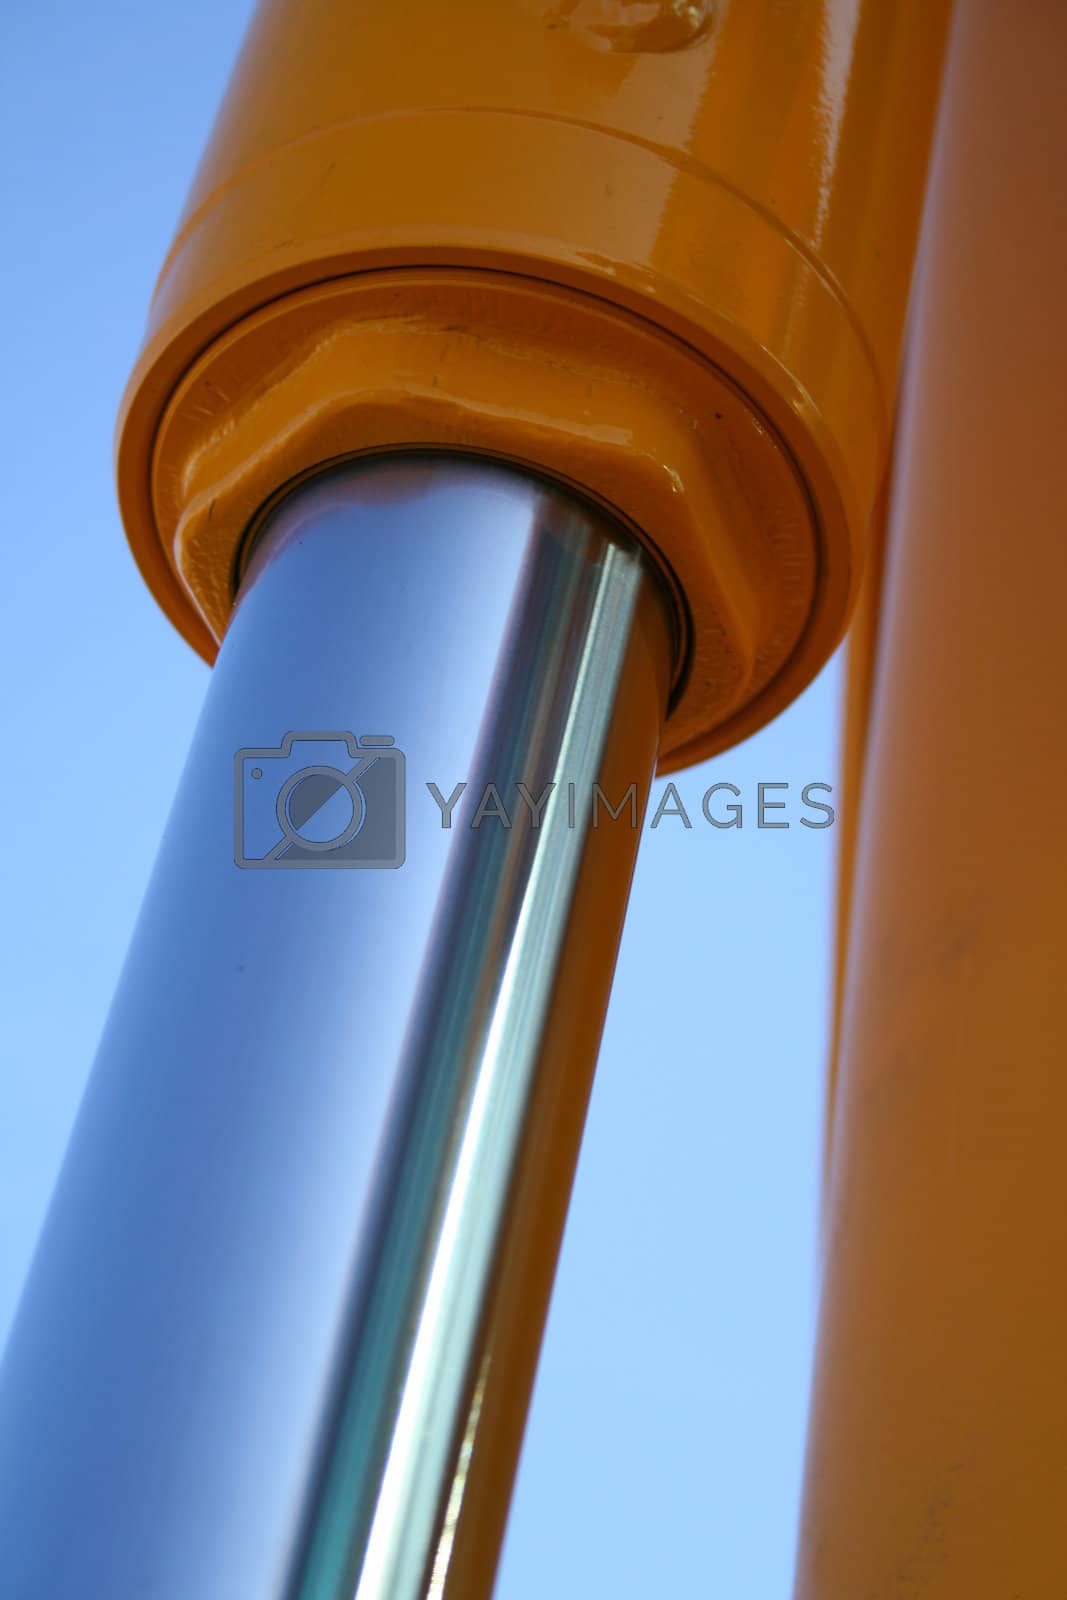 Royalty free image of The chromeplated piston of hydraulic system of a dredge by parrus